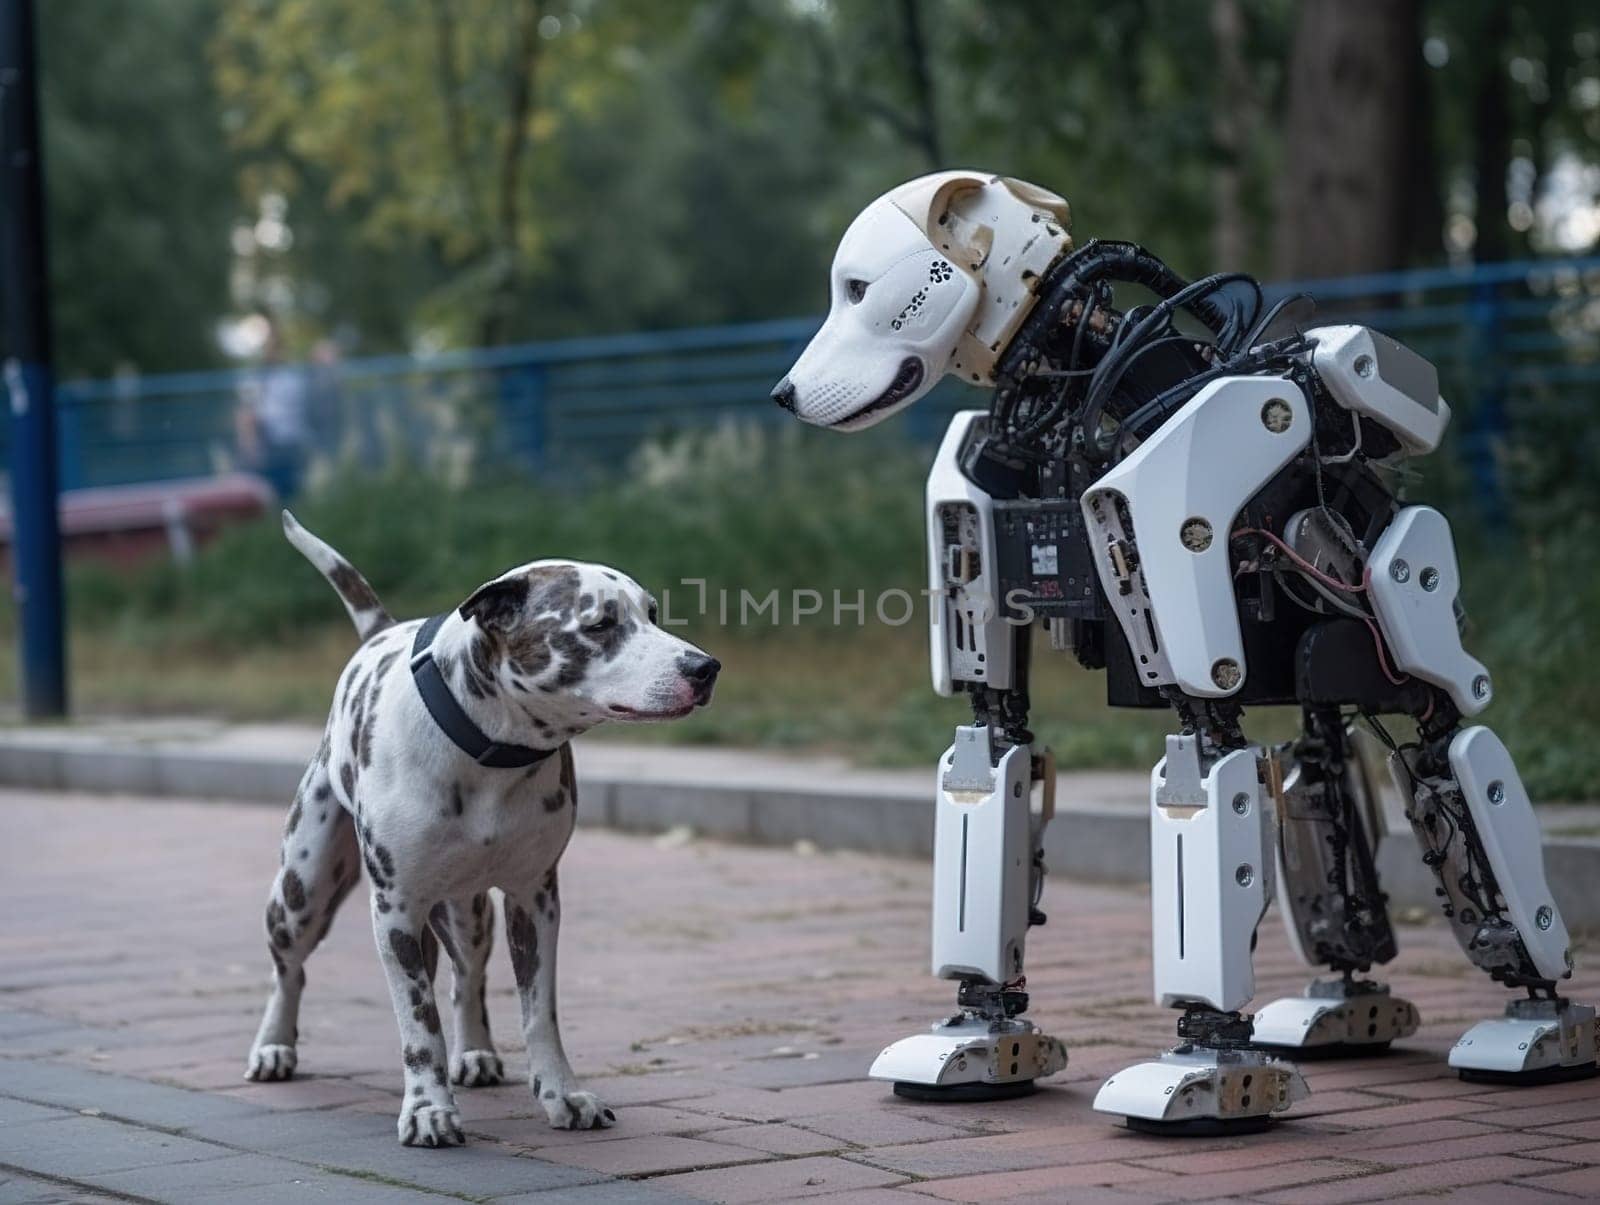 Dog Robot And Real Dog Interact On A Street by tan4ikk1